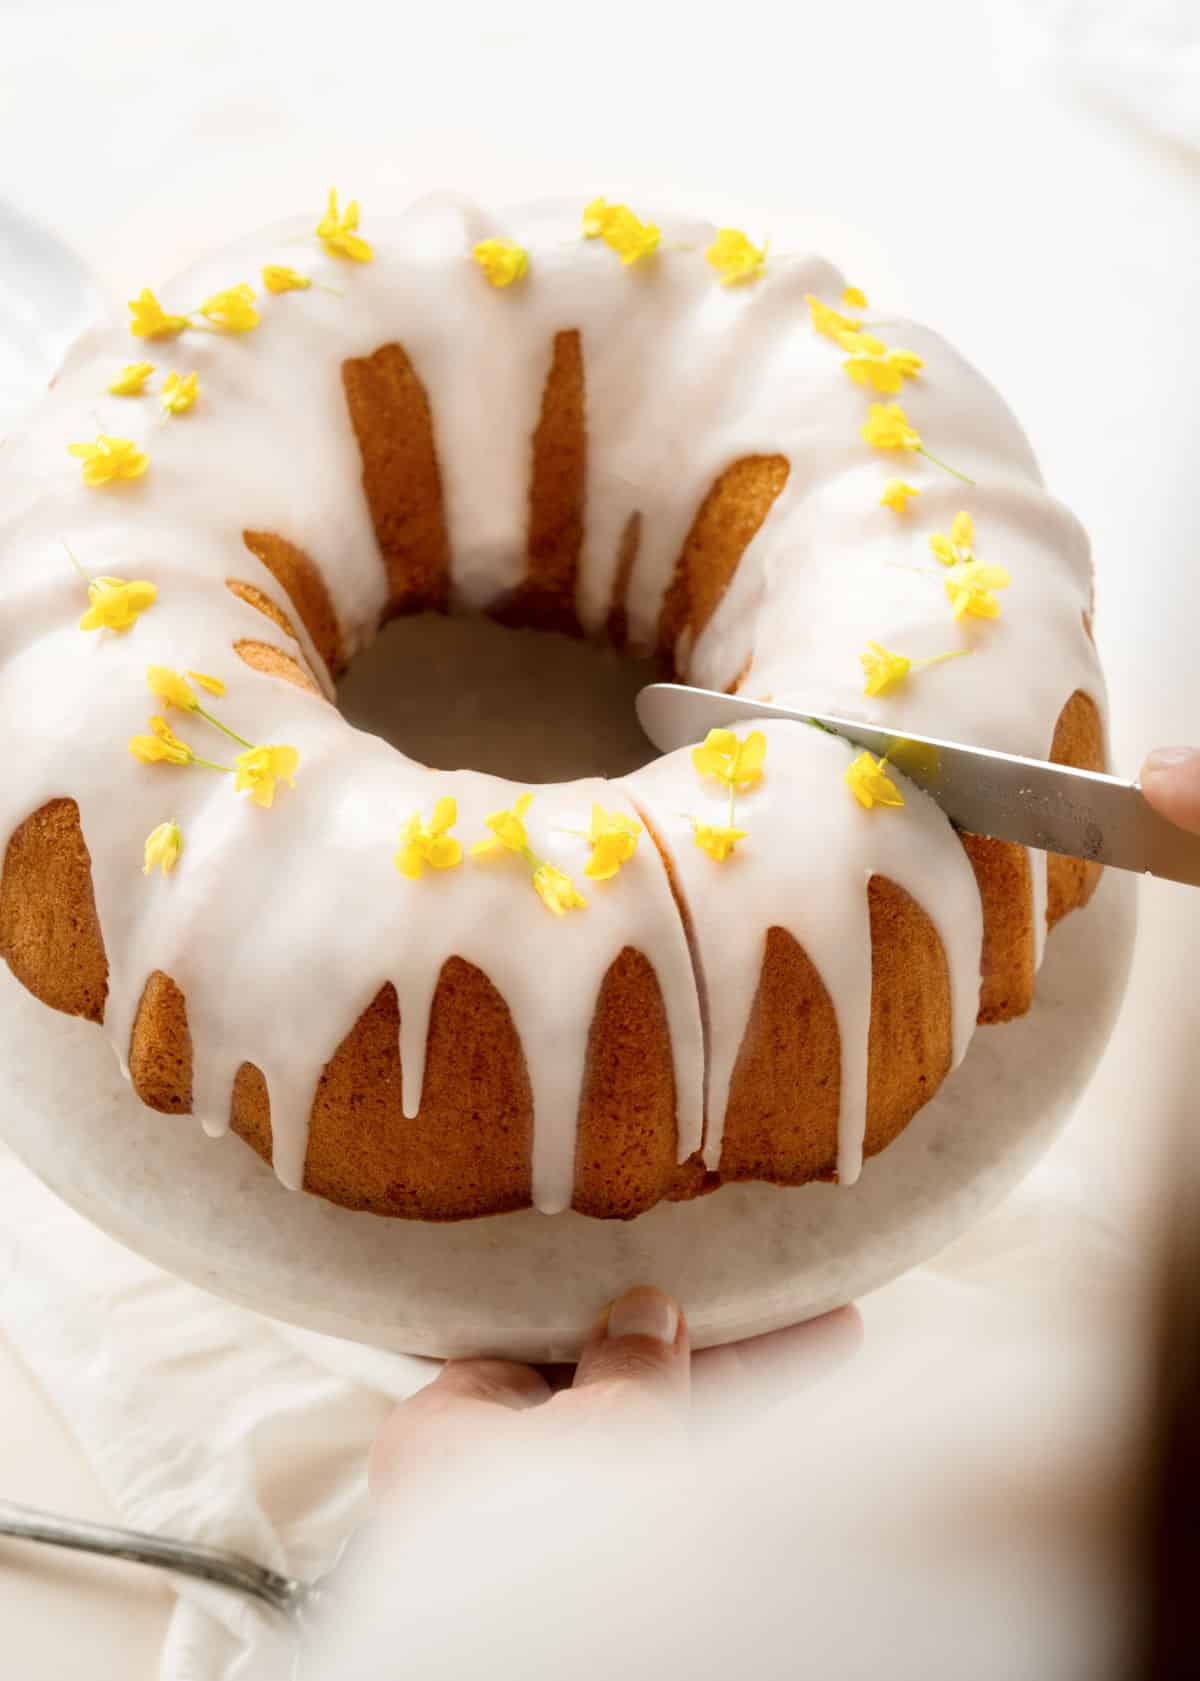 Whole glazed lemon bundt cake being cut with a silver knife on a white background. 